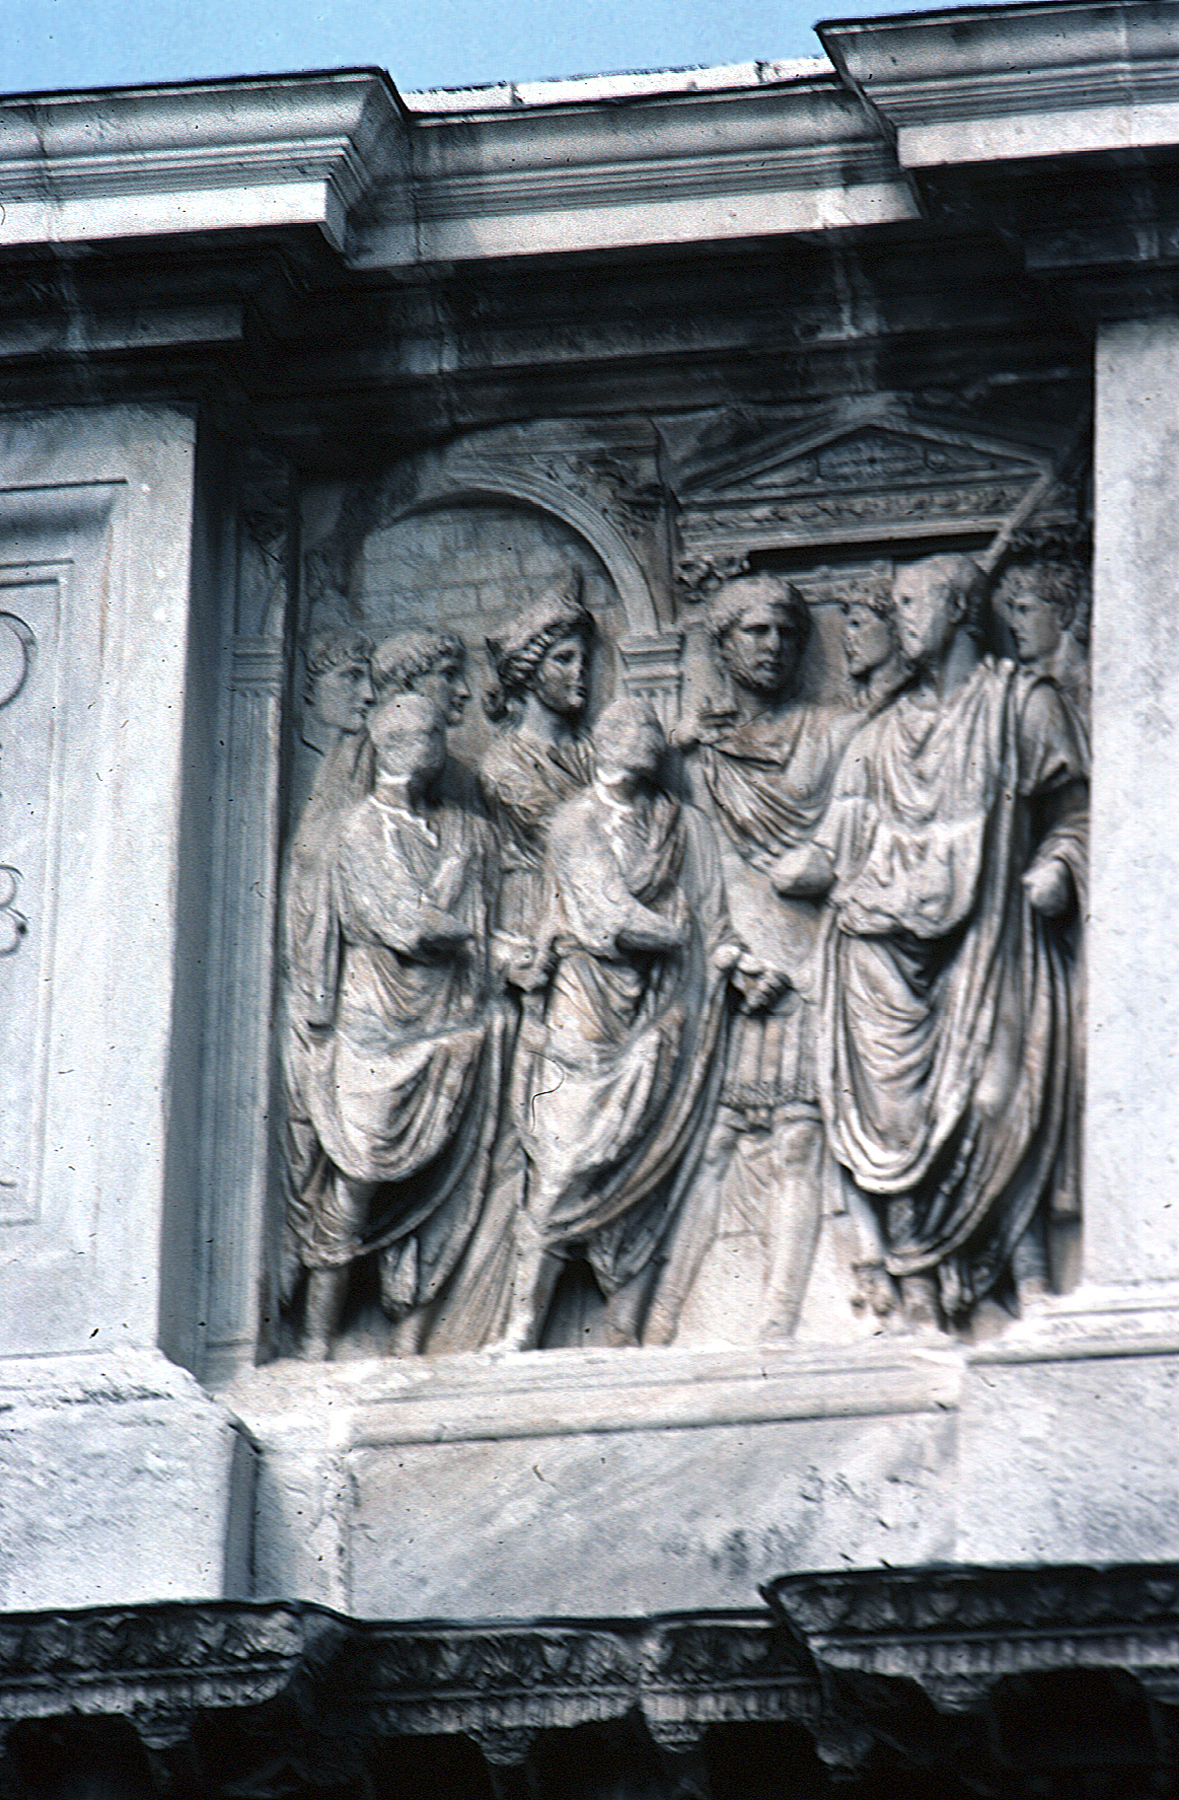 a statue of three men surrounded by women